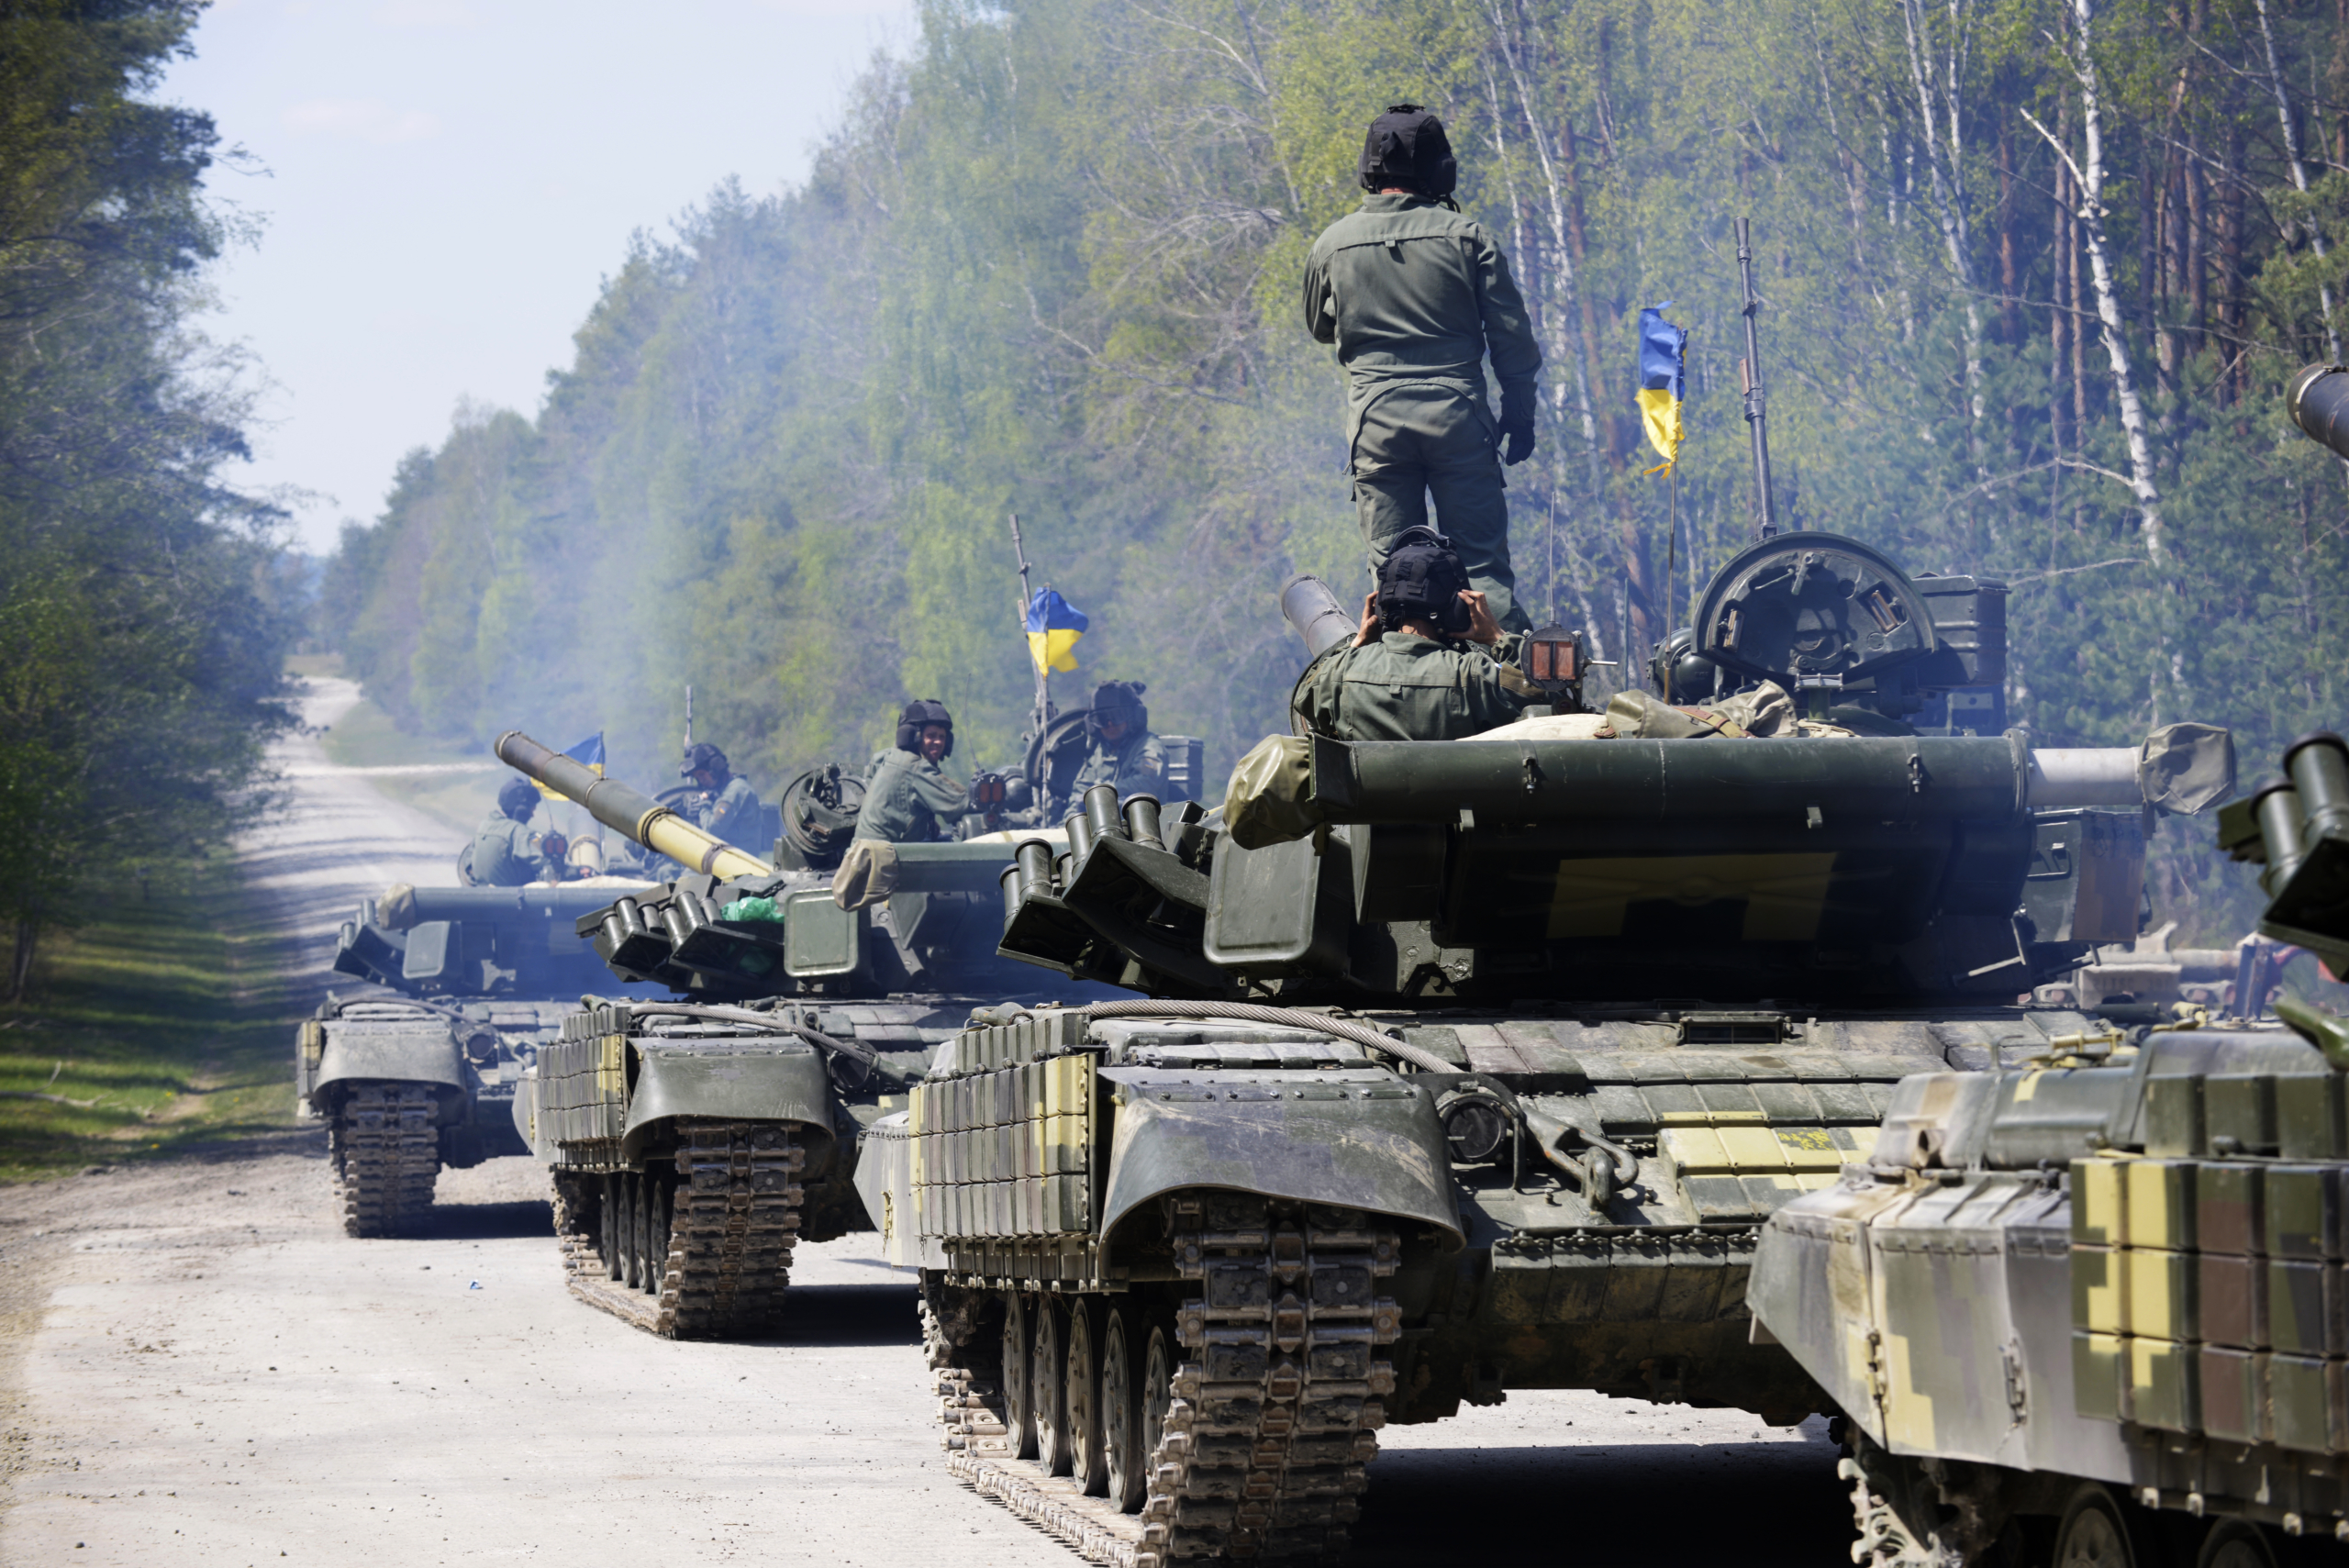 How Western offensive weapons can help Ukraine defeat Russia | ECFR